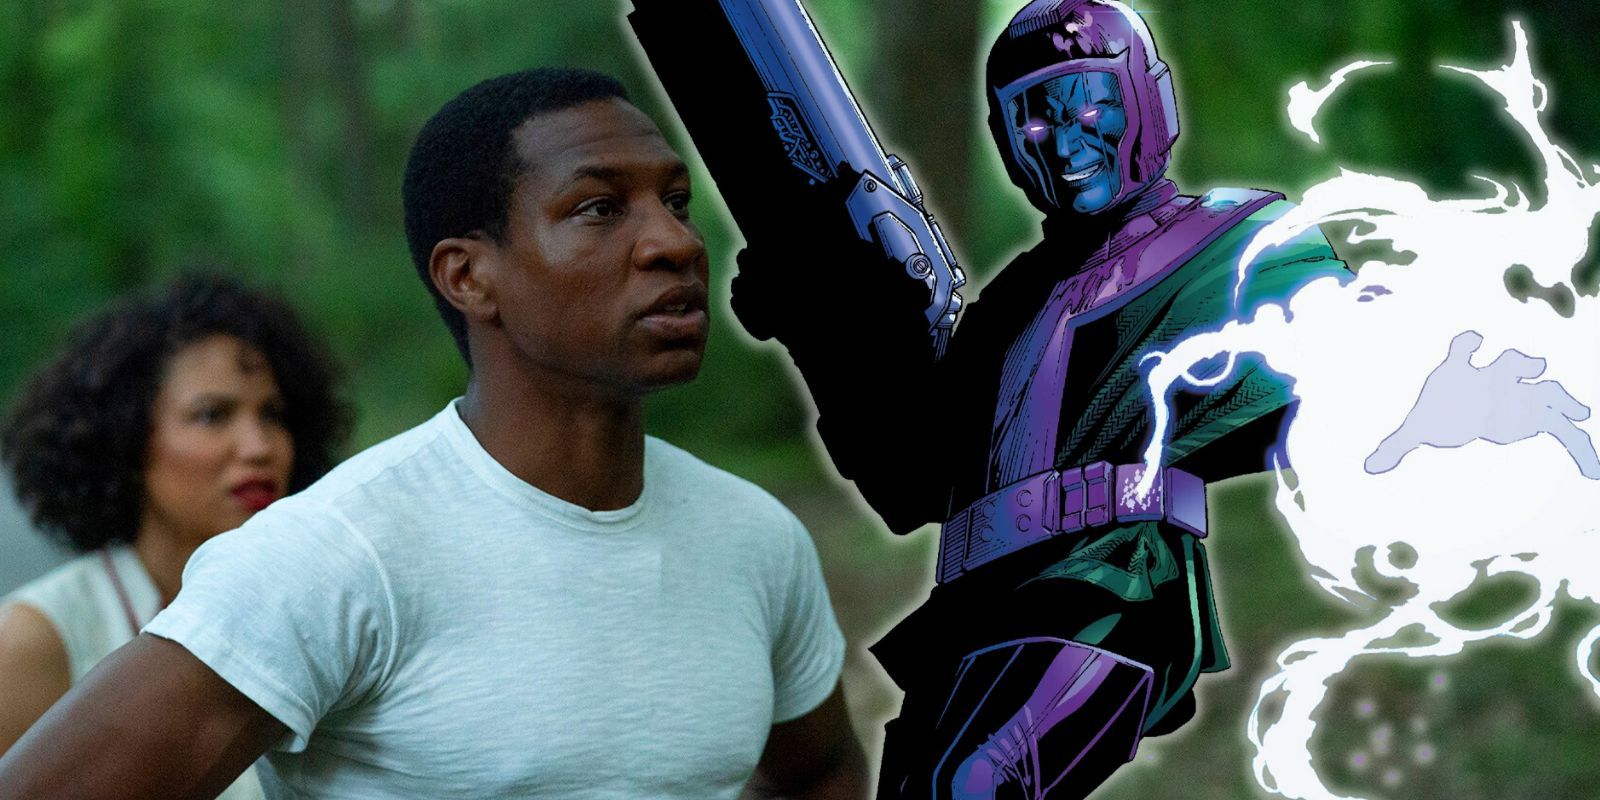 Jonathan Majors in Lovecraft Country next to Marvel's Kang